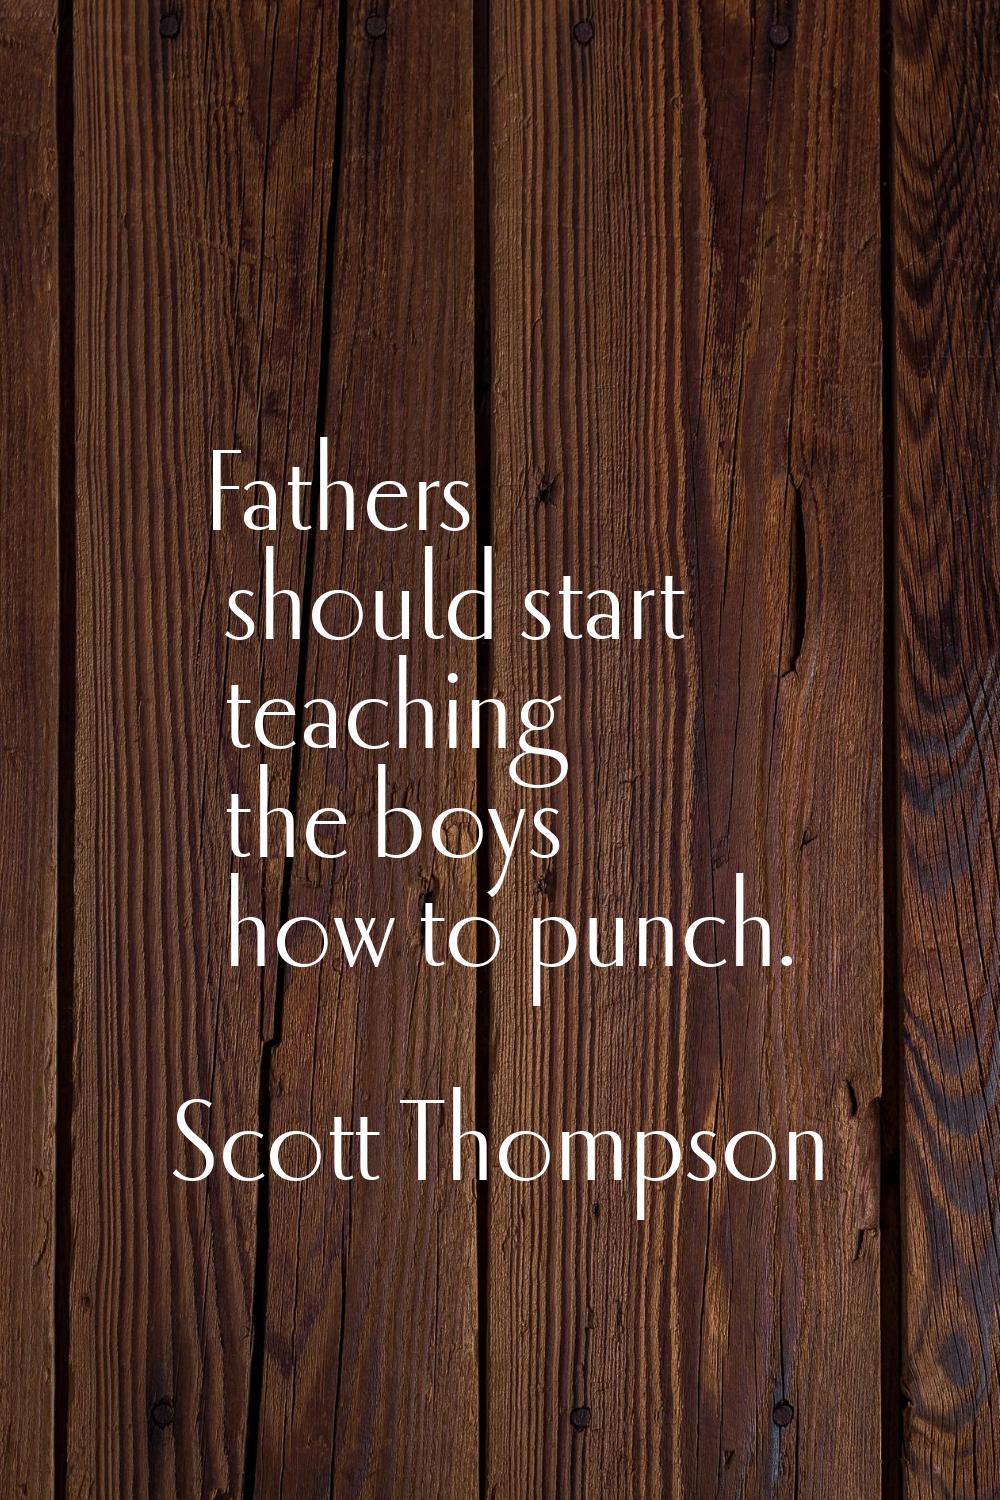 Fathers should start teaching the boys how to punch.